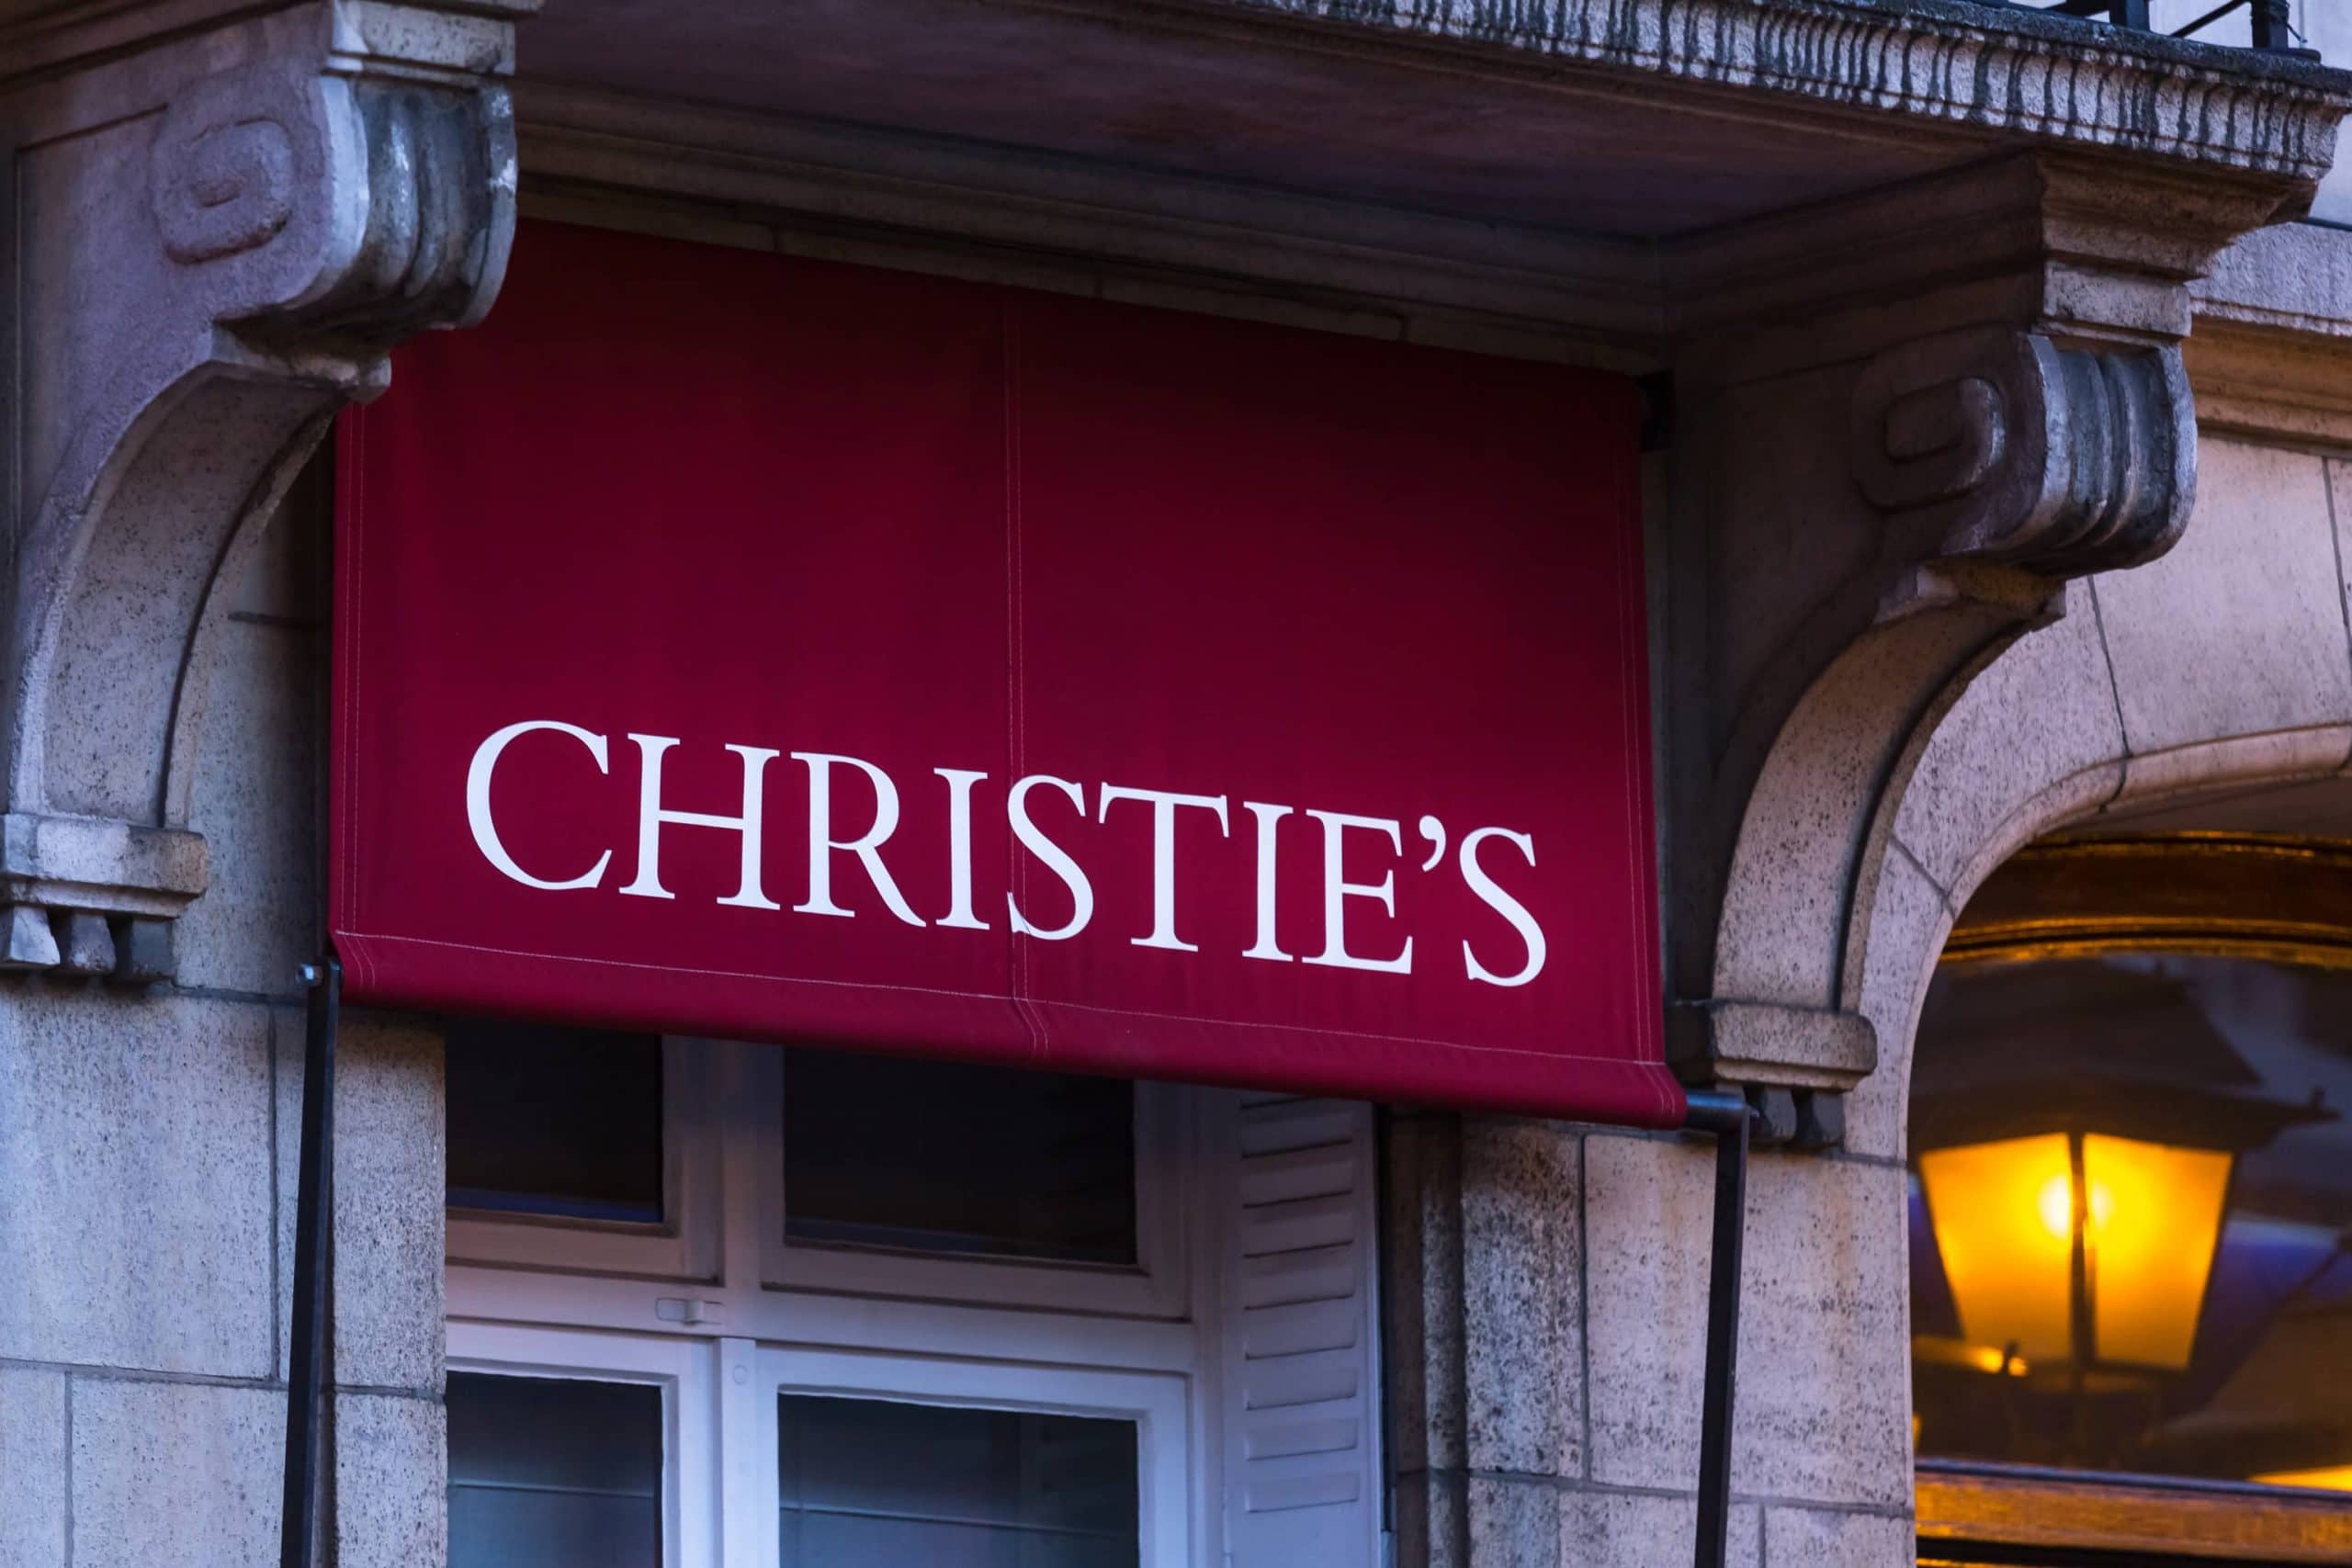 Social tokens are used at Christie’s auction